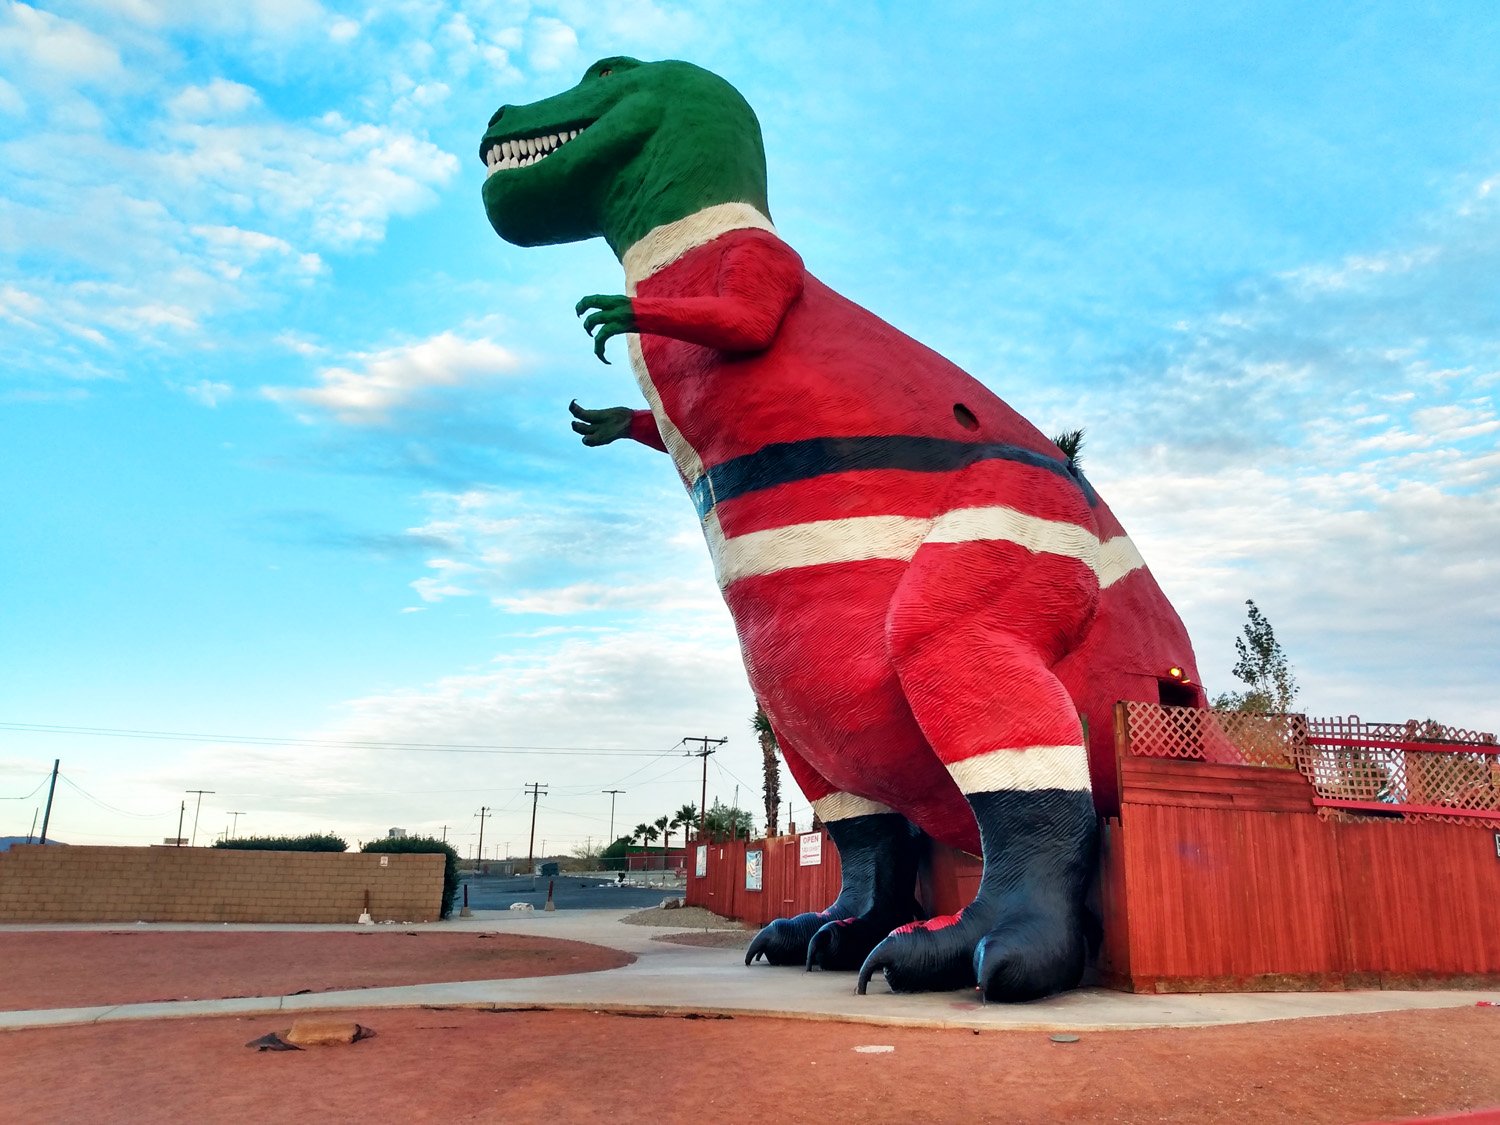 Also they dressed up the T-Rex for Christmas.